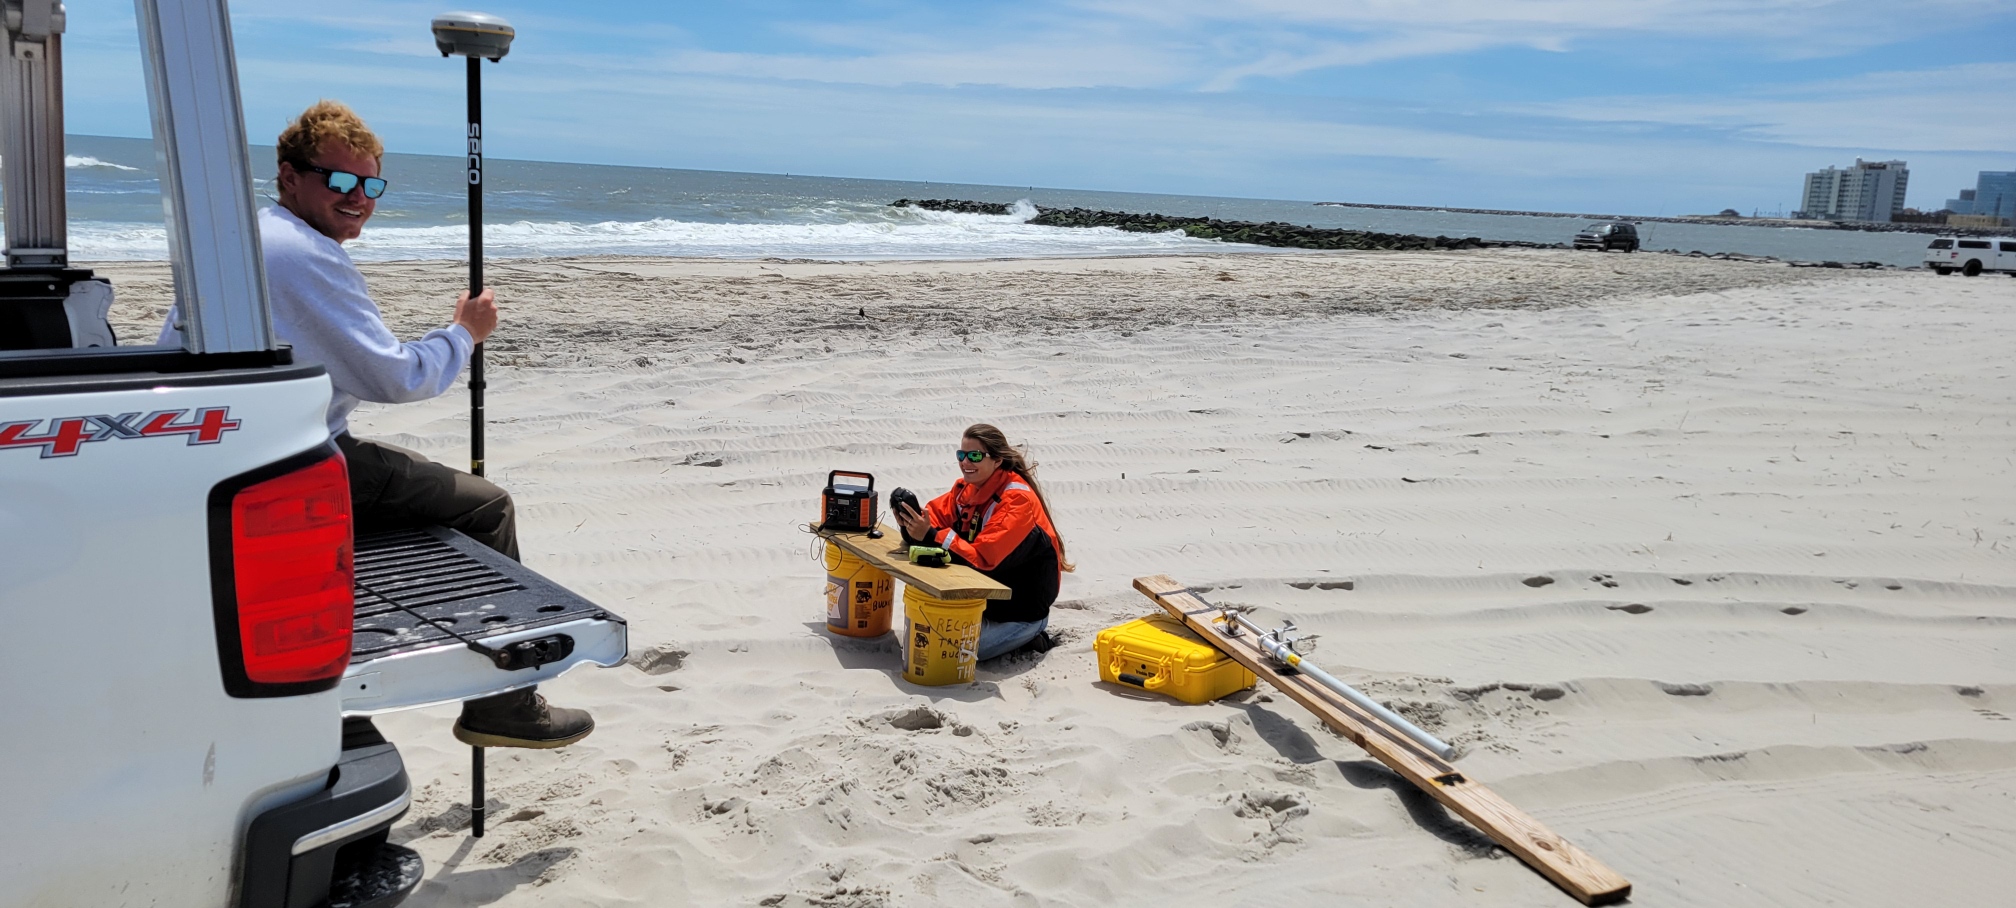 A Day in Nicole's Life as a Hydrographer